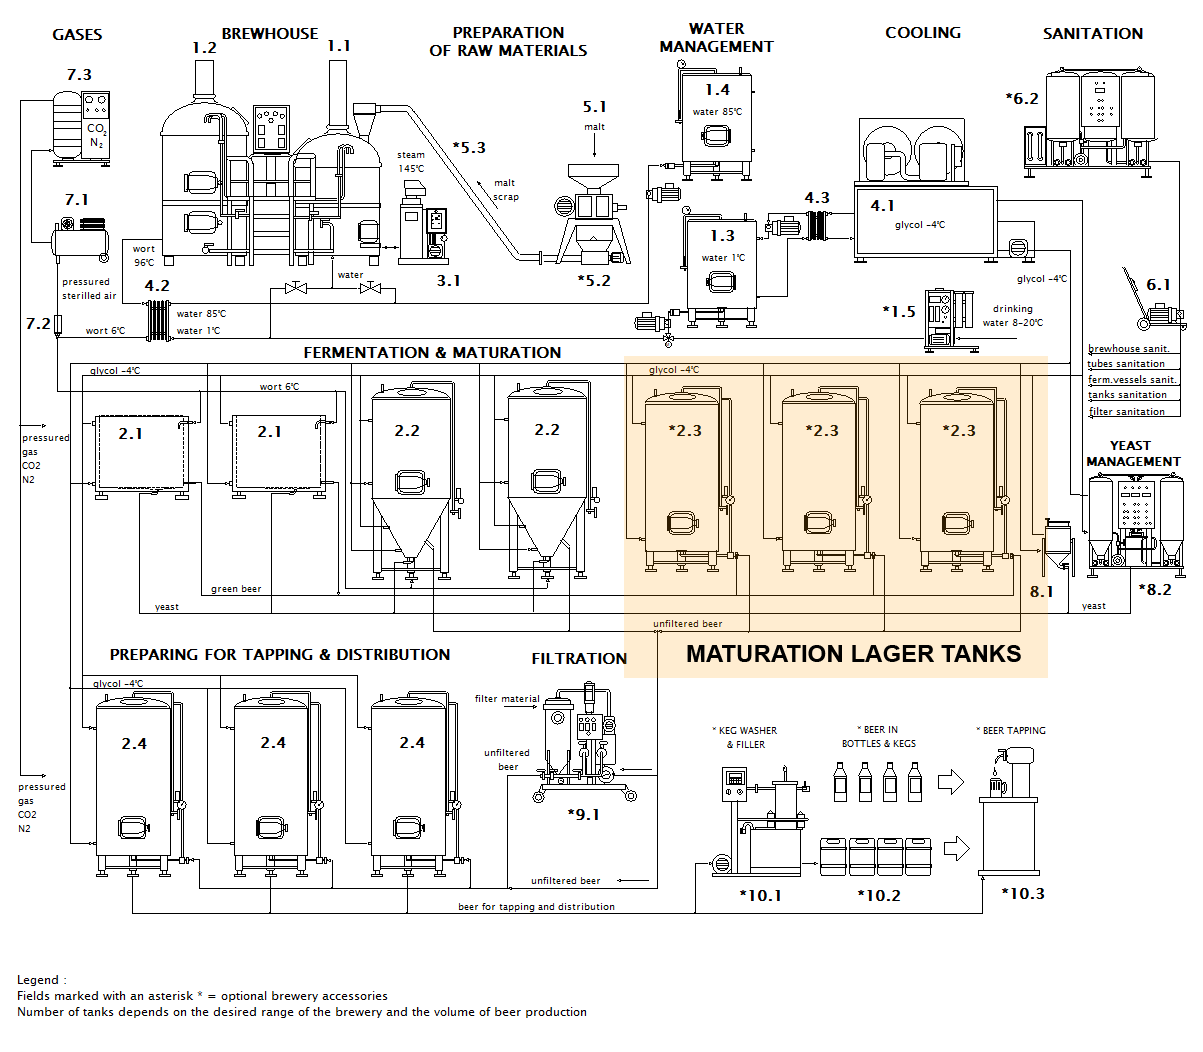 Scheme of the craft brewery with position of the beer maturation tanks